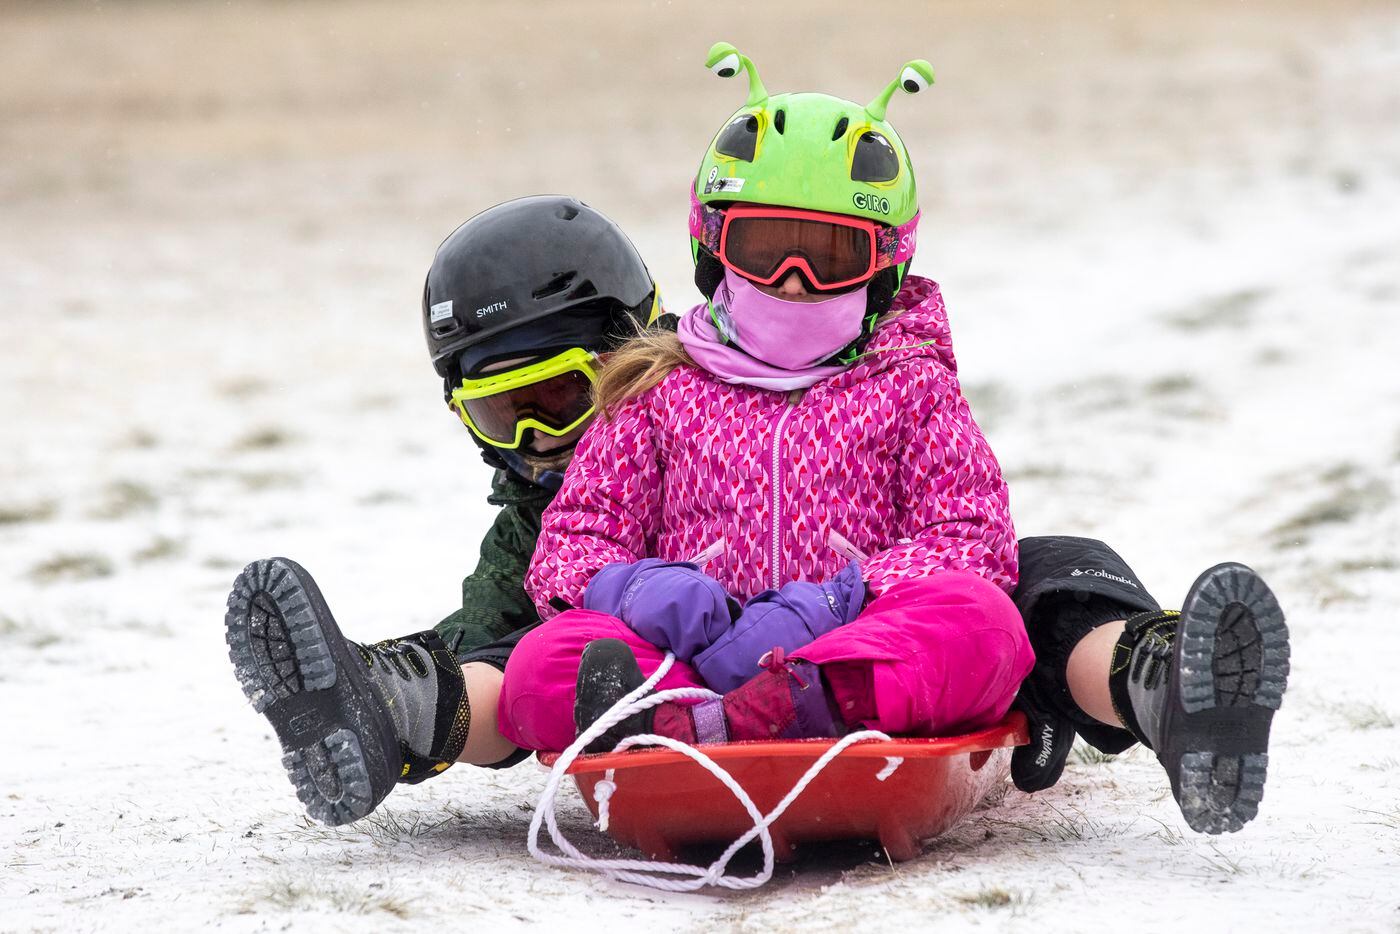 Madeline Daniel (right), 6, and her brother Riley, 8, sled in the snow at Flag Pole Hill Park on Sunday, Feb. 14, 2021, in Dallas. The region is currently under a winter storm warning. The Daniel’s father, Matt, said he bought the sled five years ago, hoping it would one day come in handy when he bought a house on the hill. “I bought it in the middle of summer that year,” he laughed. “I’m glad they’re finally getting to enjoy it.”